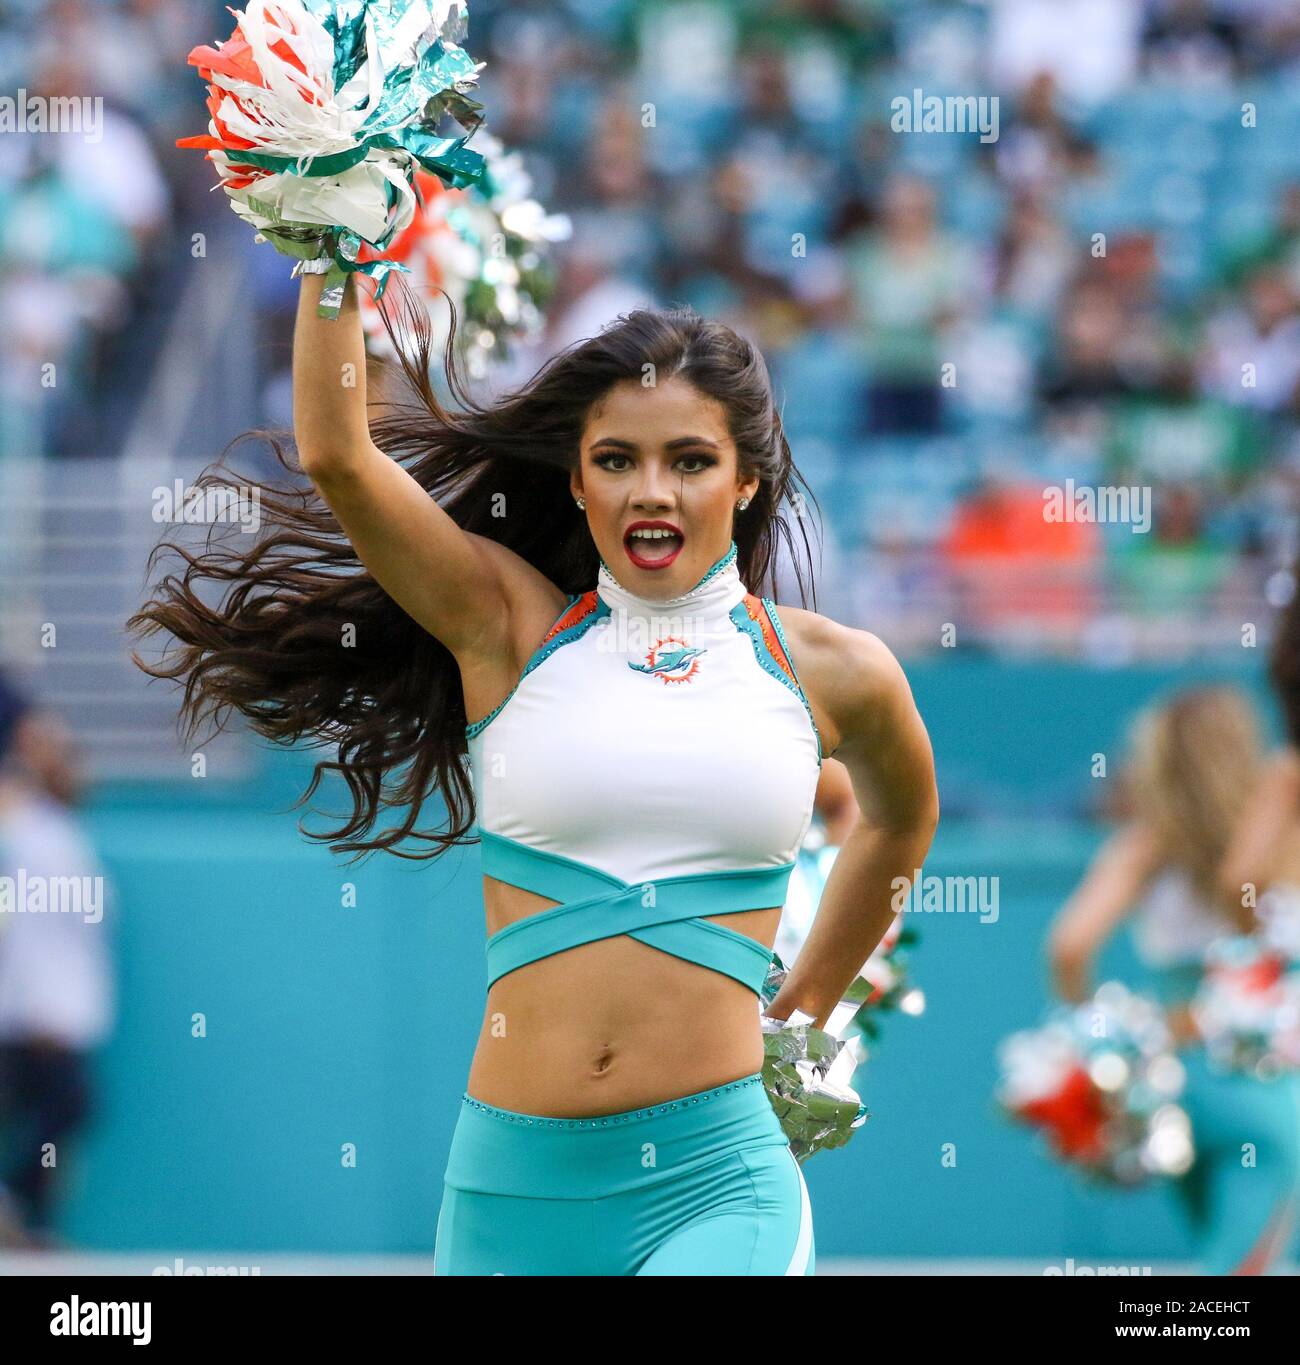 December 1, 2019, Miami Gardens, Florida, USA: A Miami Dolphins cheerleader performs during an NFL football game between the Miami Dolphins and the Philadelphia Eagles at the Hard Rock Stadium in Miami Gardens, Florida. The Dolphins won 37-31. (Credit Image: © Mario Houben/ZUMA Wire) Stock Photo